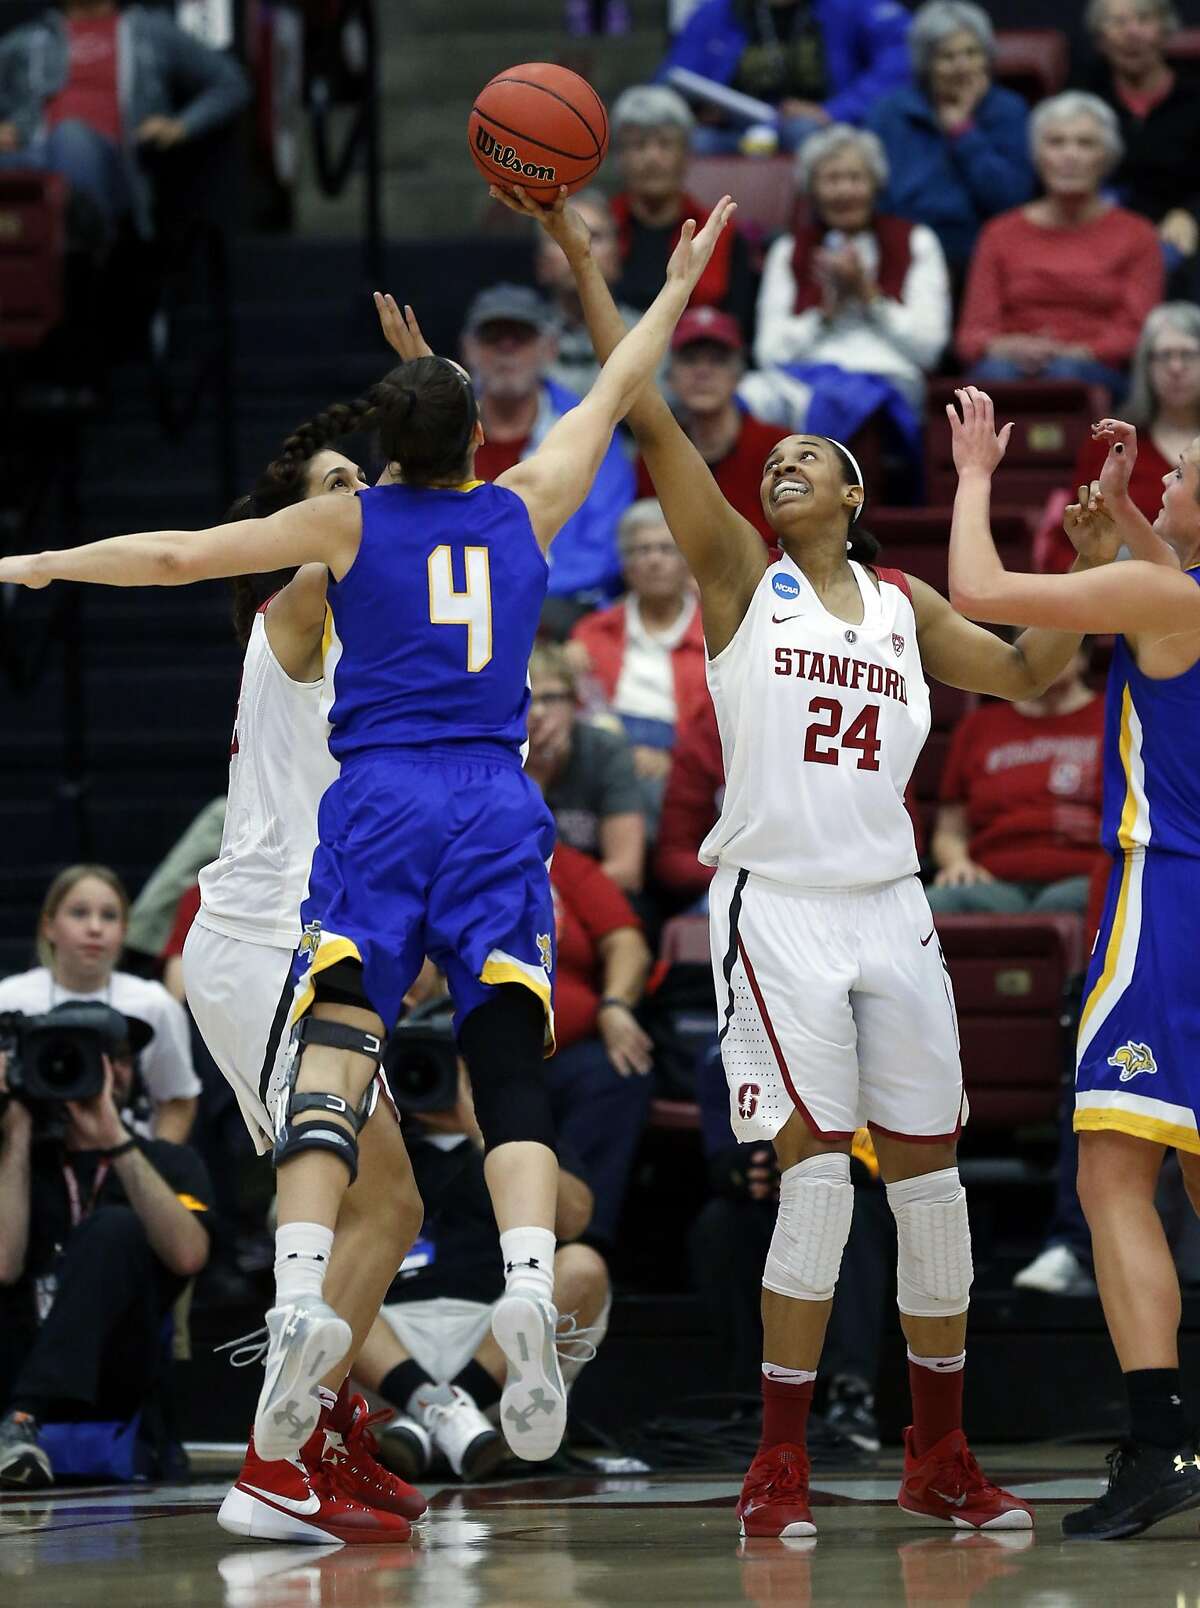 Stanford's Erica McCall and South Dakota State's Gabby Boever vie for a rebound in 1st quarter during 2016 NCAA Division 1 Women's Basketball Tournament game in Stanford, Calif., on Monday, March 21, 2016.